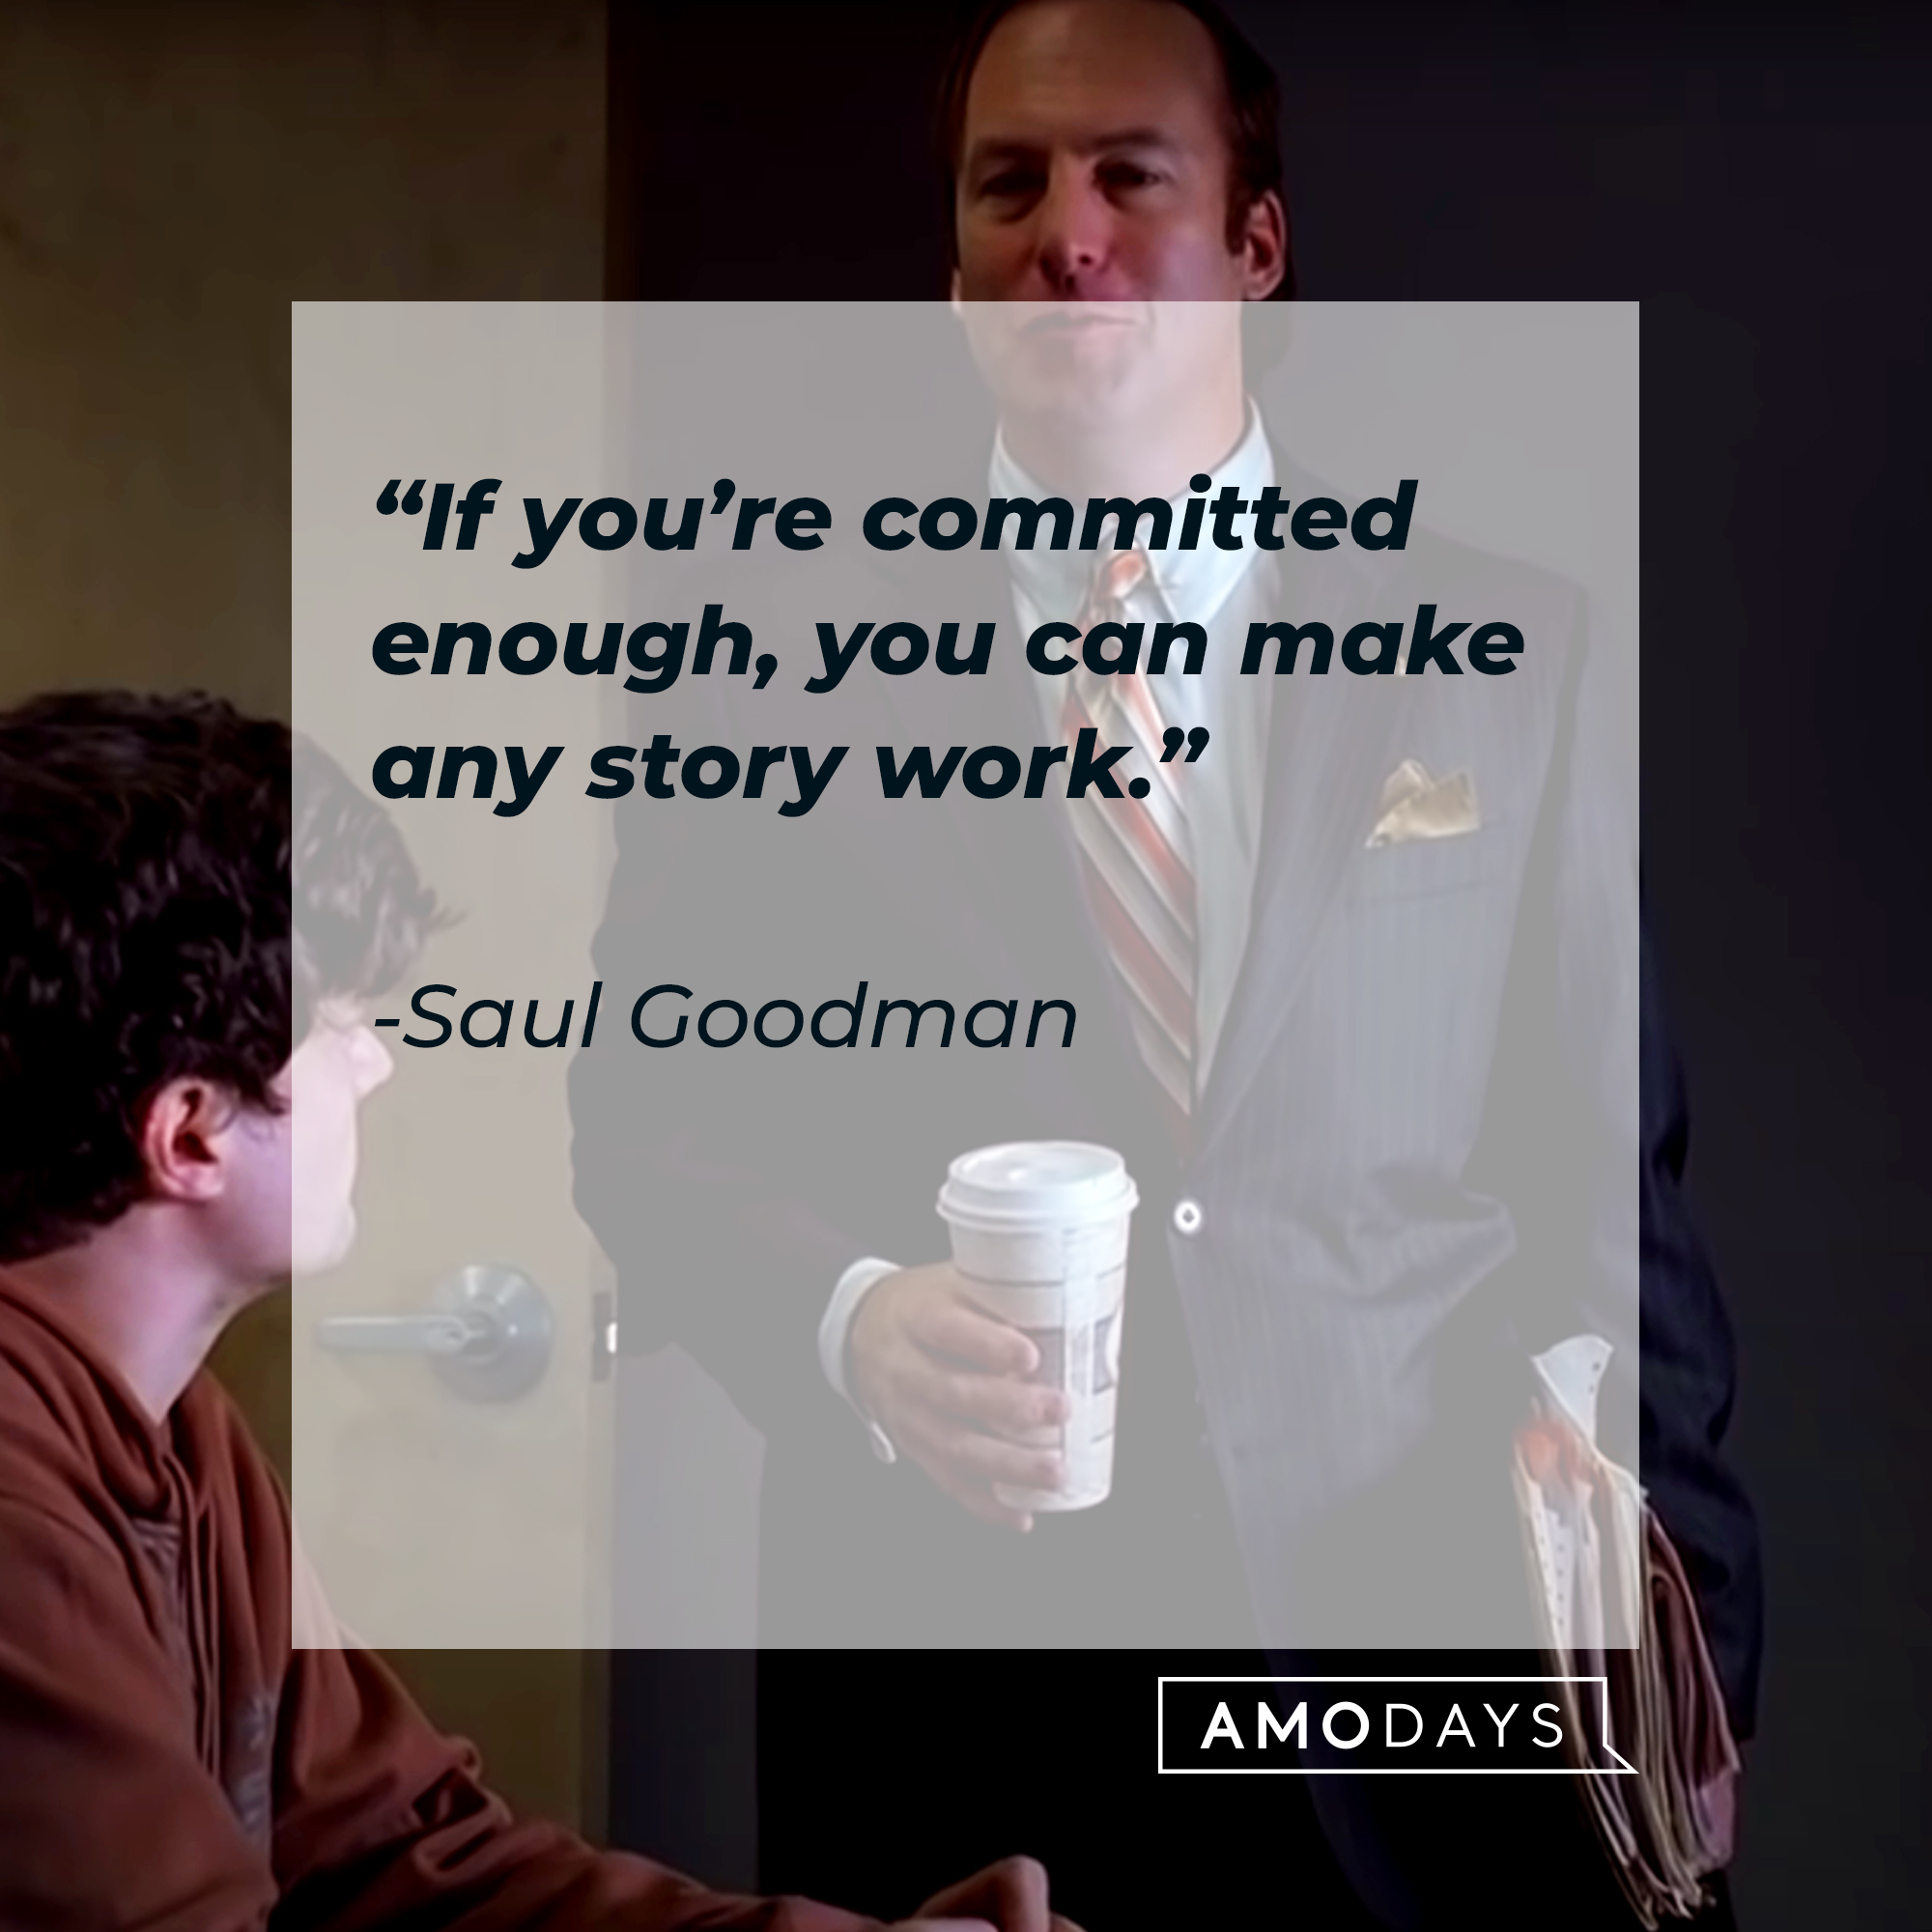 An image of Saul Goodman, with his quote: “If you’re committed enough, you can make any story work.” | Source: Youtube.com/breakingbad